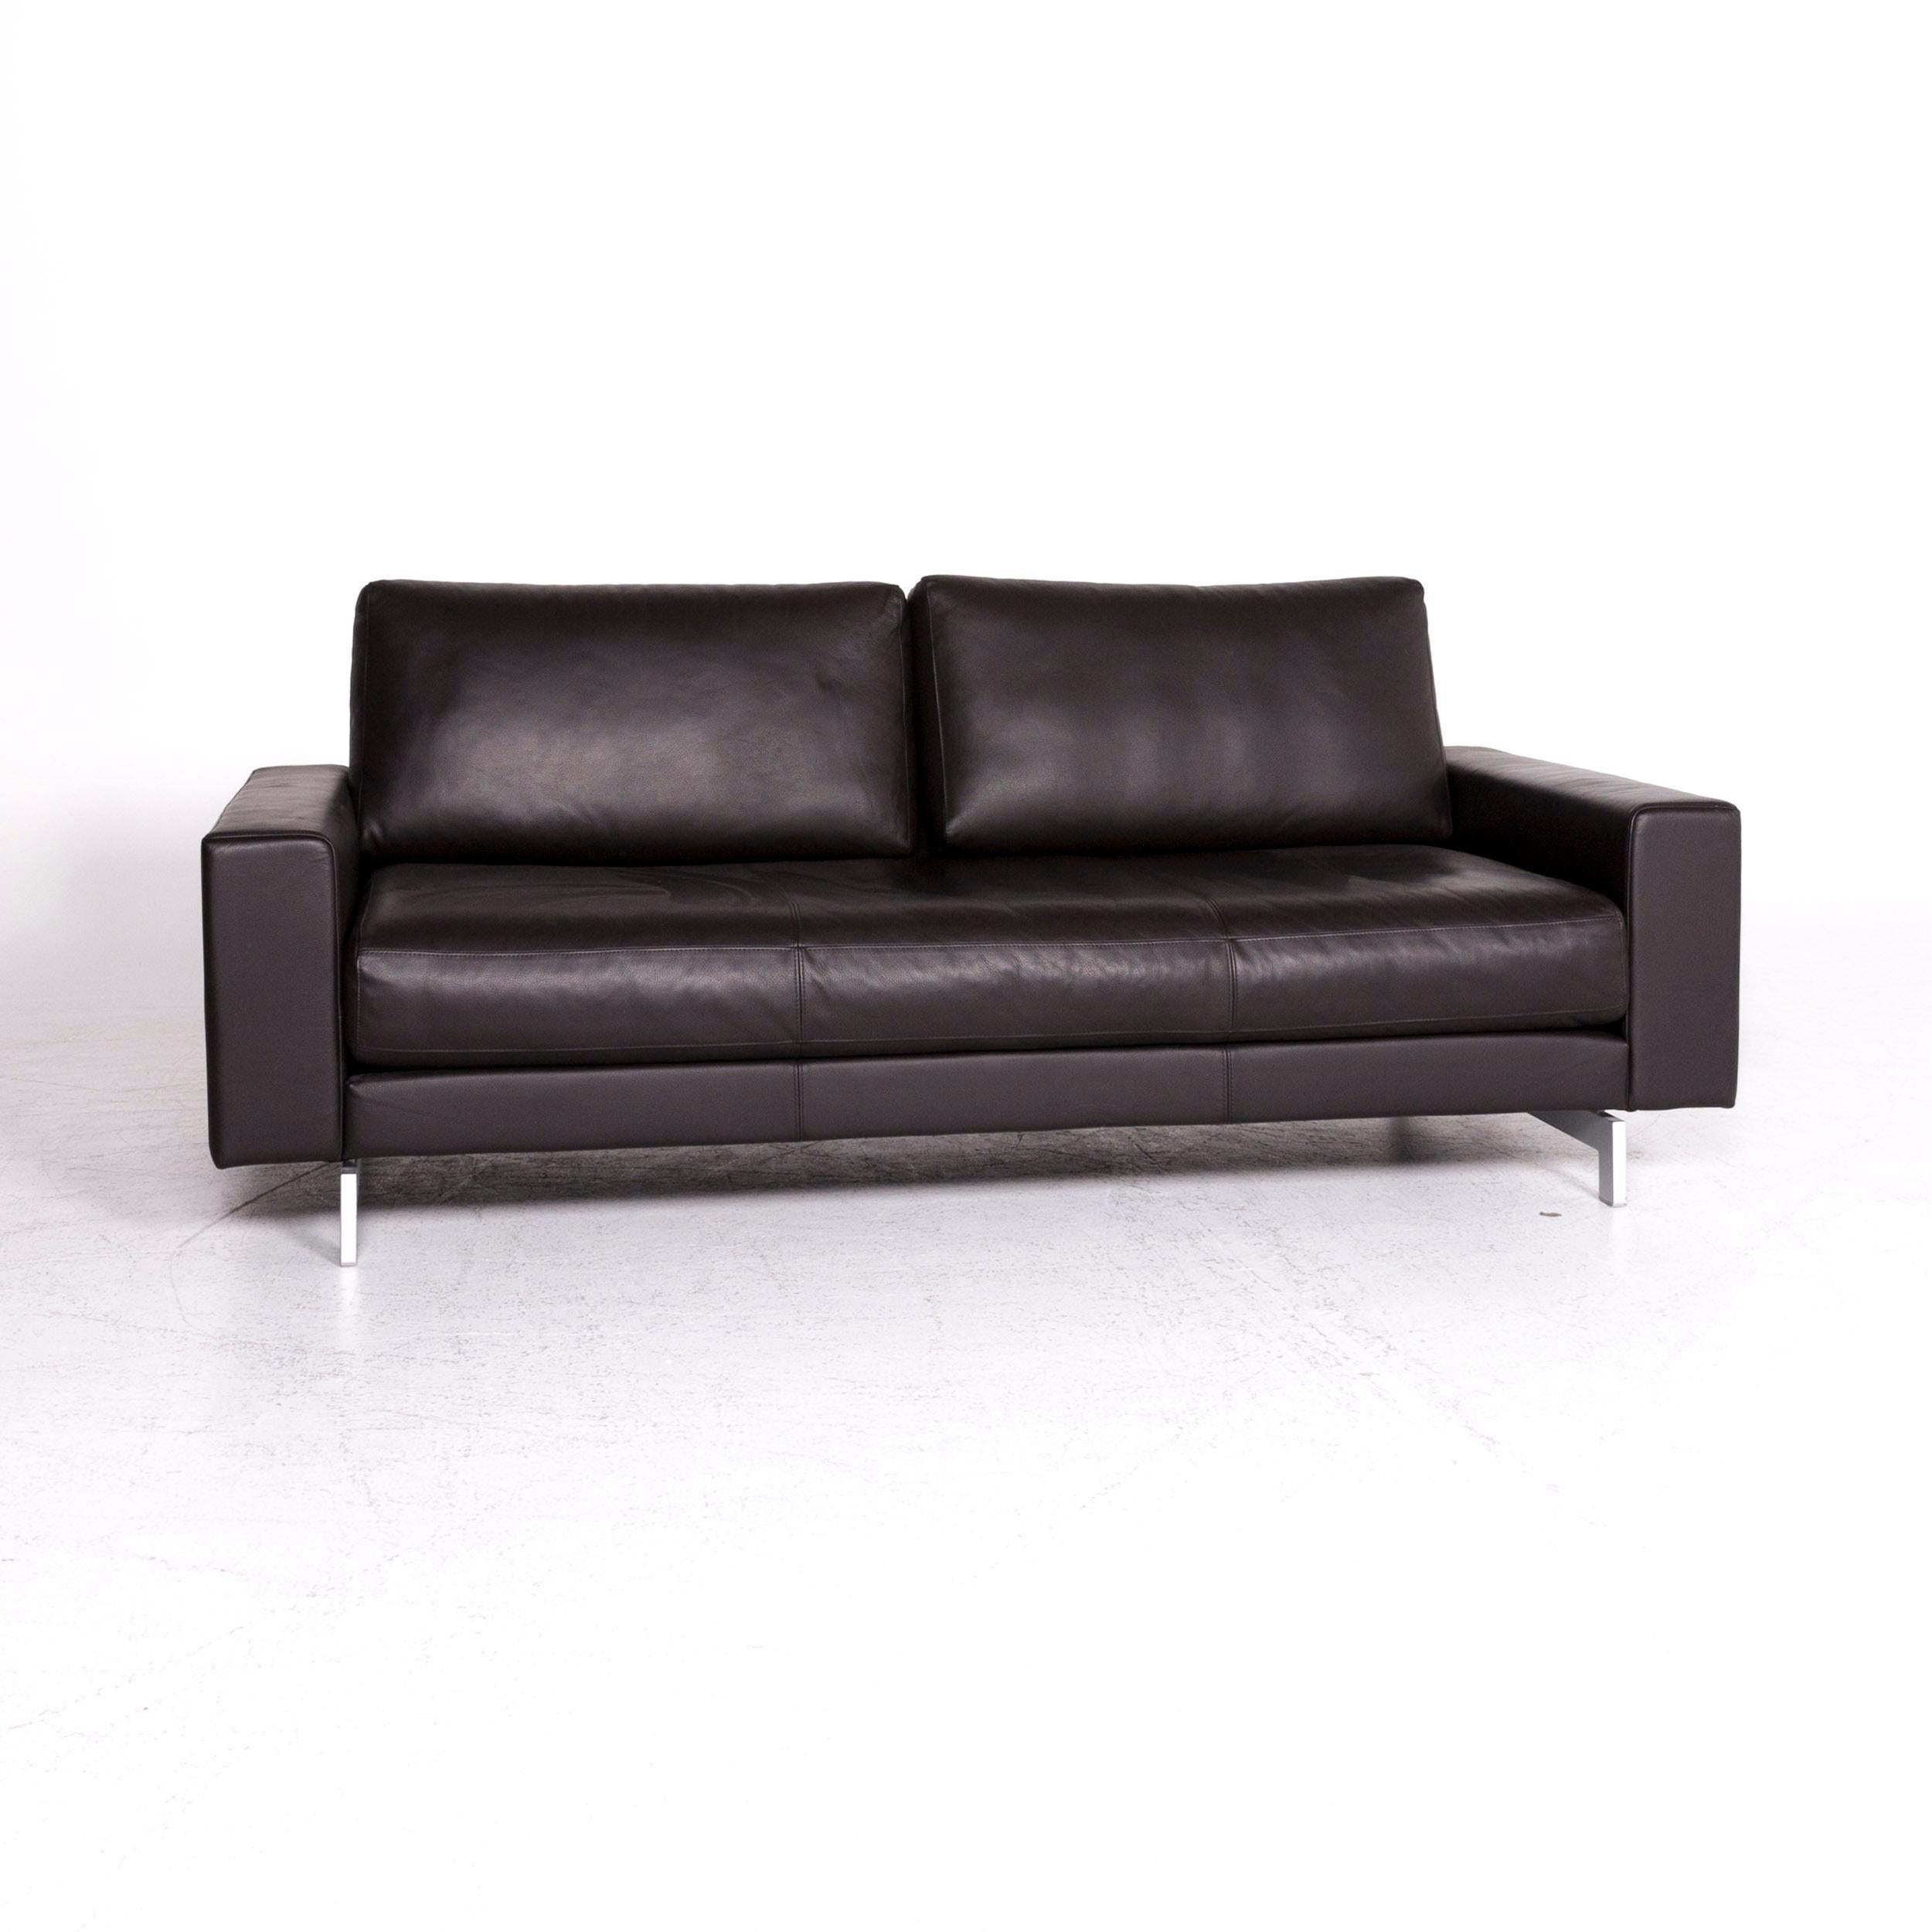 Modern Rolf Benz Vida Designer Leather Sofa Brown Two-Seat Couch